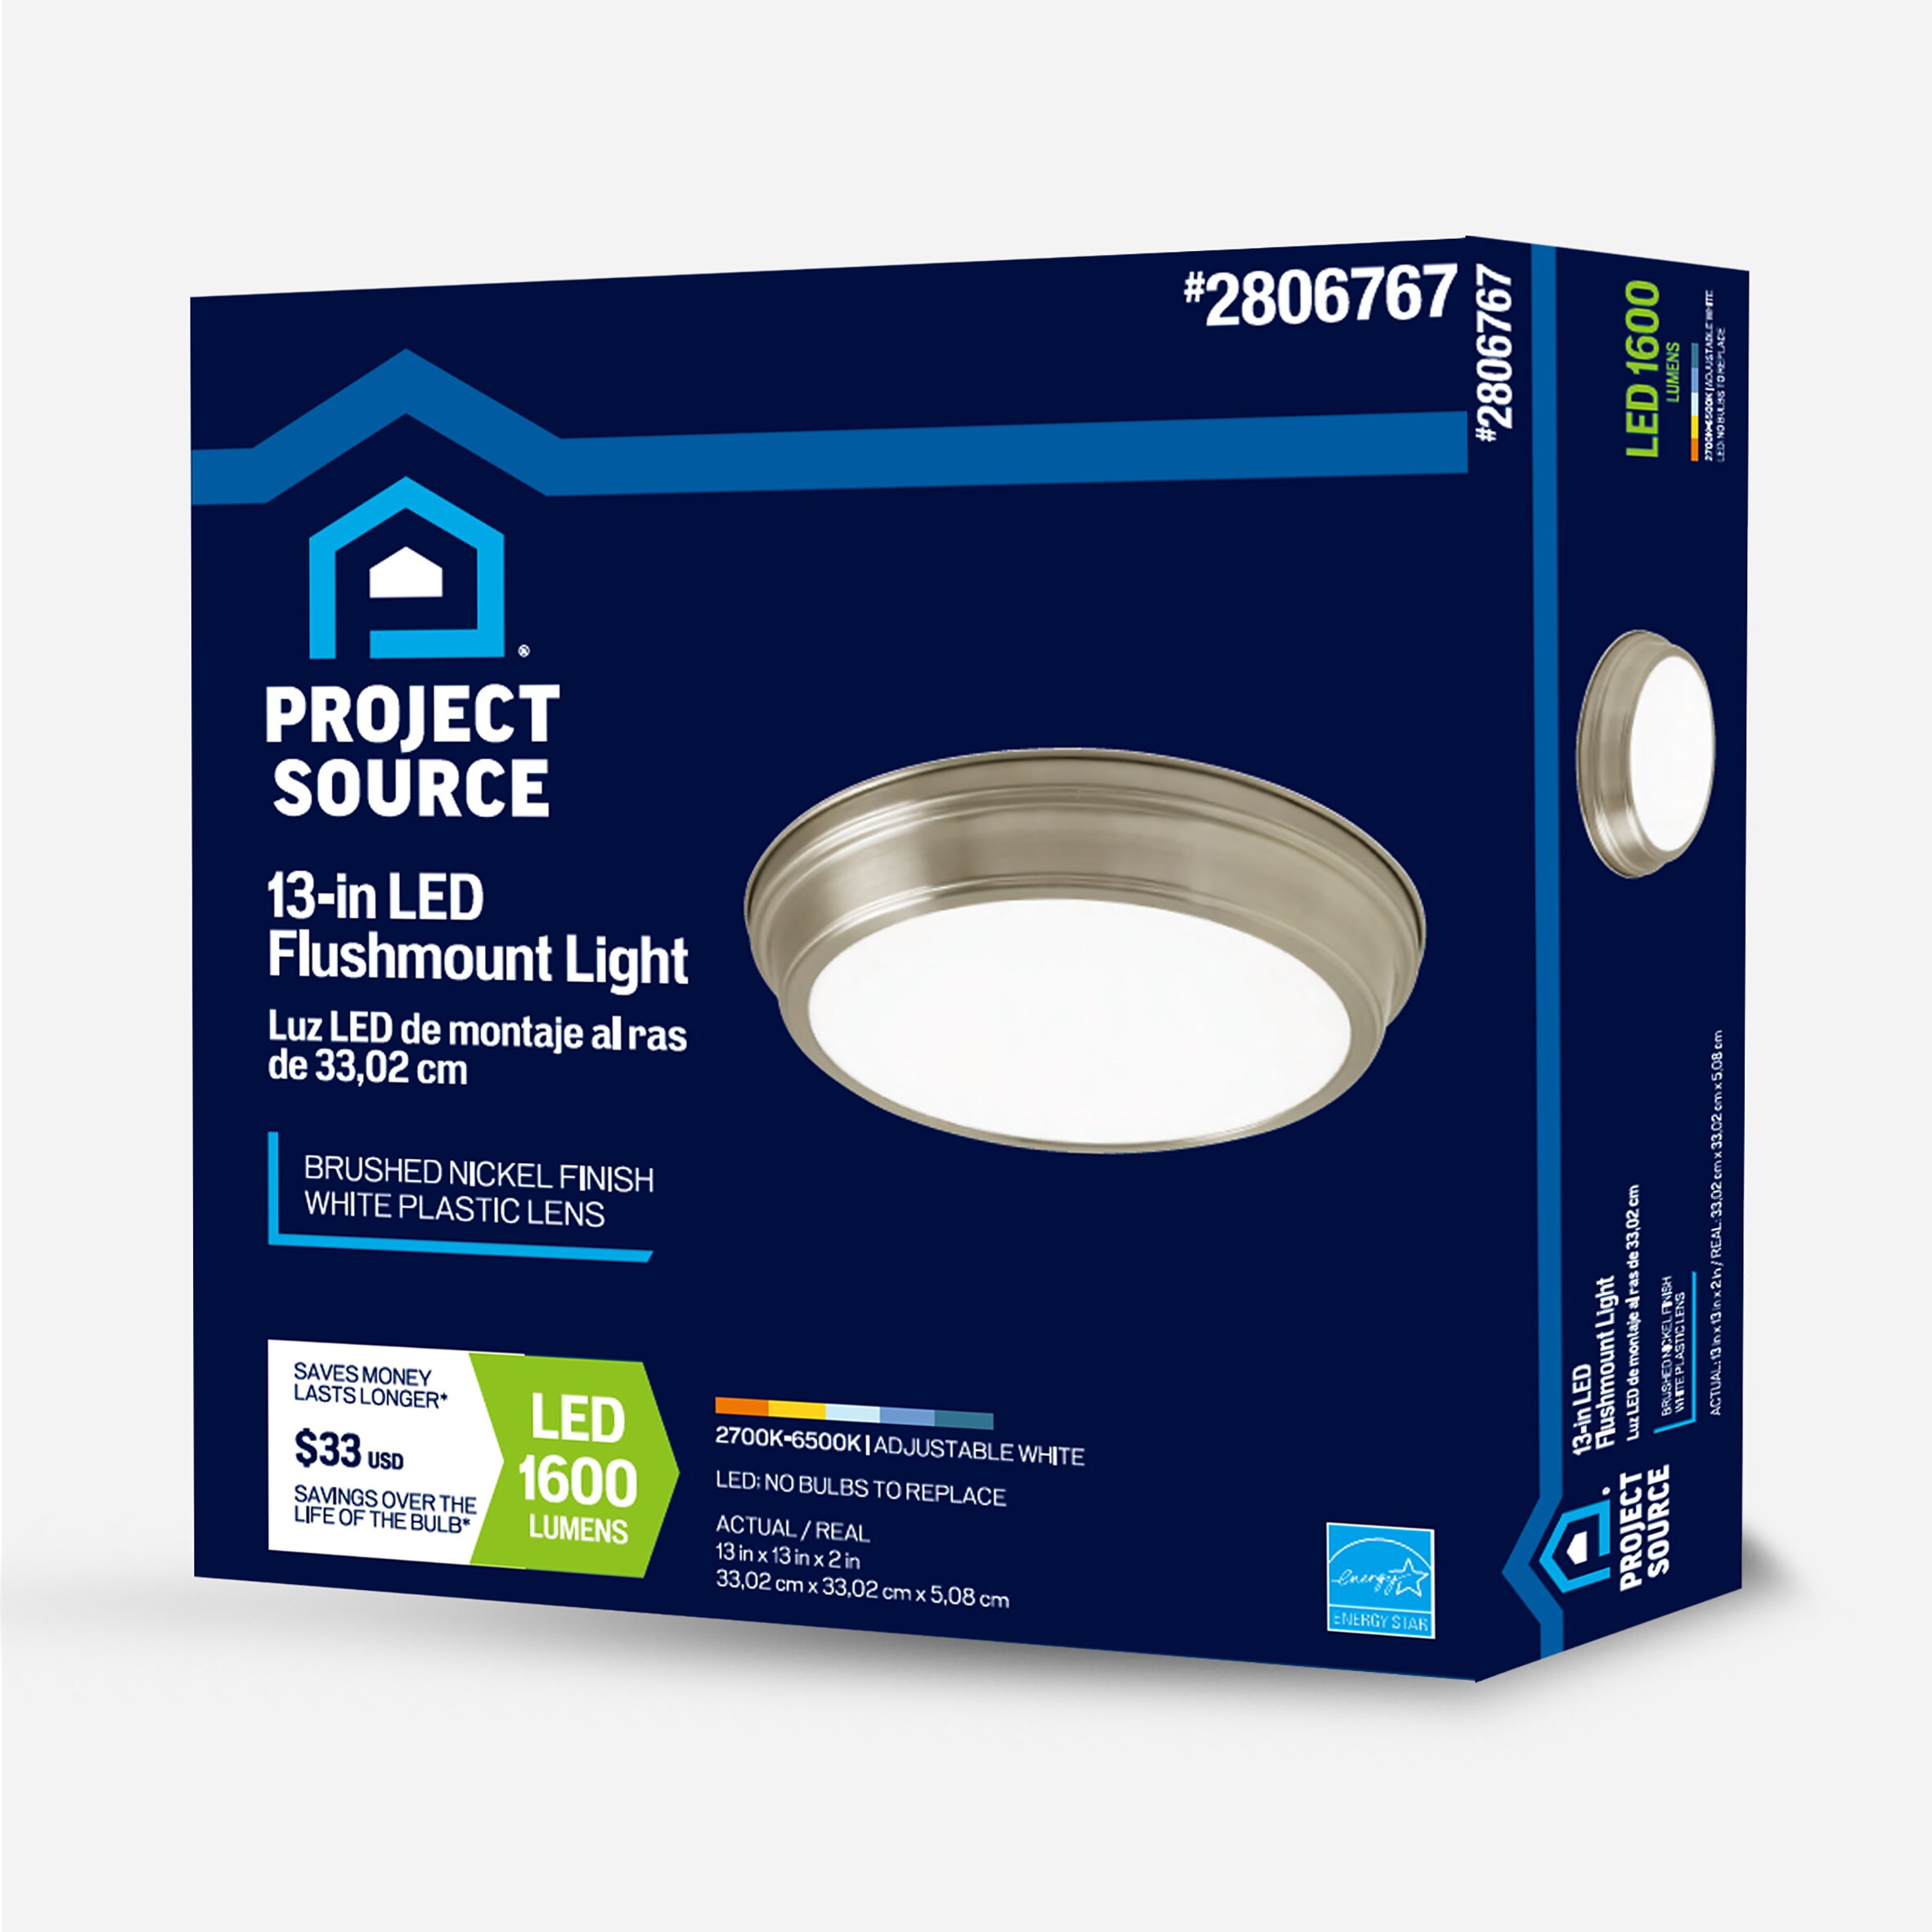 Project in ENERGY STAR 1-Light Flush Brushed Source at Mount Mount Lighting Flush Nickel department 13-in Bella Light LED the